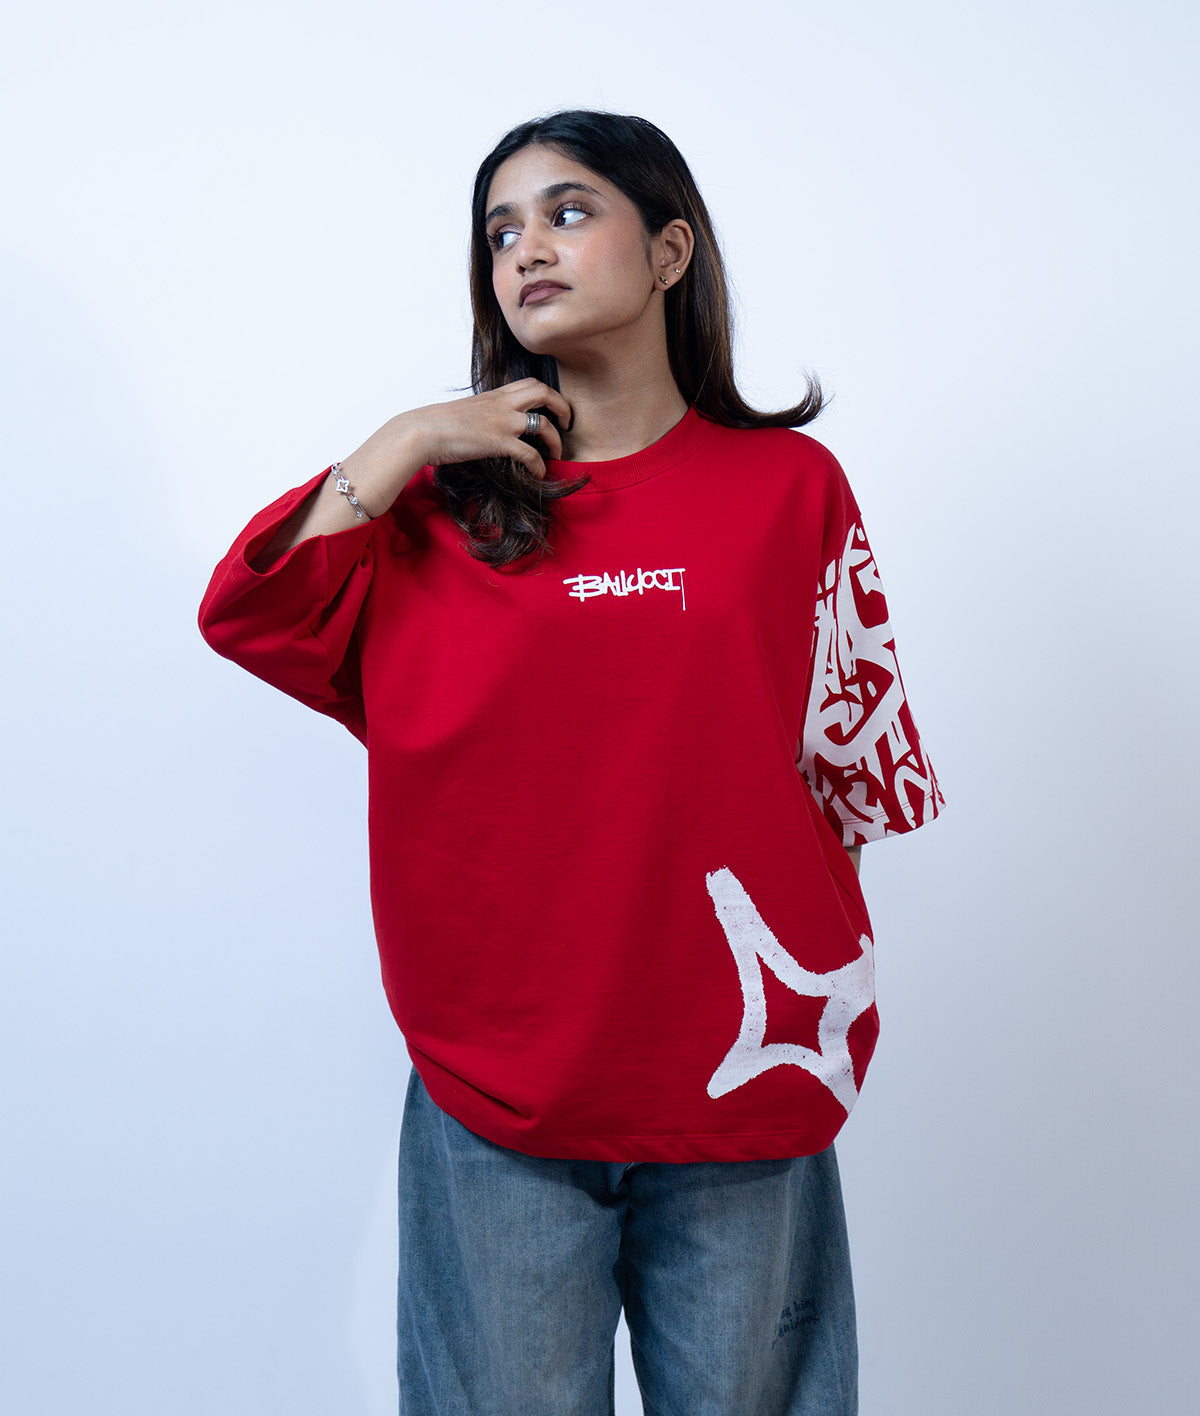 Front view image of a girl wearing red graffi tee from a street wear brand called Ballucci.